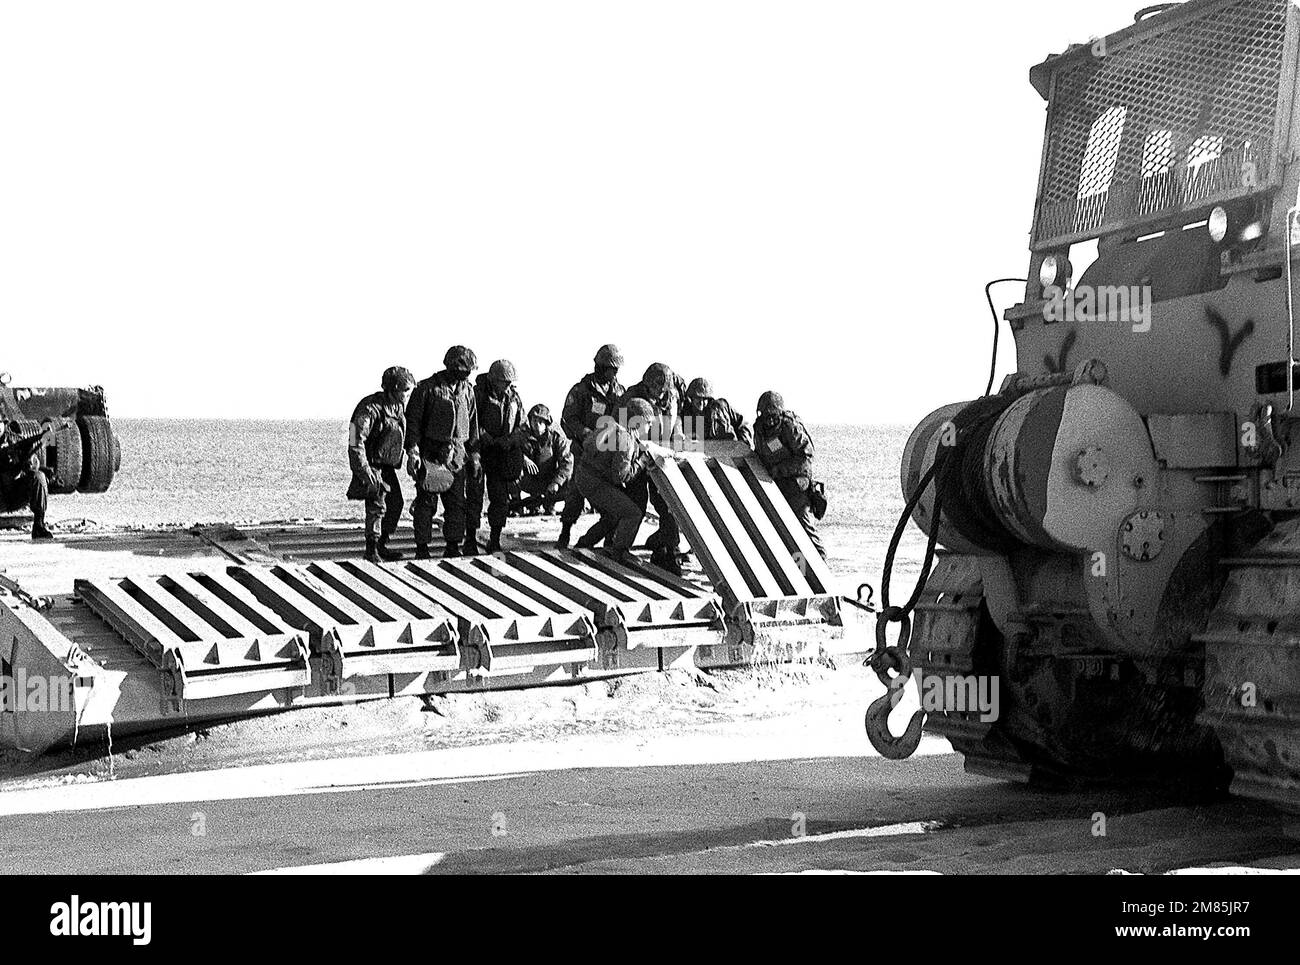 Members of Amphibious Construction Battalion 2 lift sections of a causeway during Exercise ELCAS (Elevated Causeway), a training exercise in which Seabees learn pier-construction techniques. Subject Operation/Series: ELCAS (ELEVATED CAUSEWAY) Base: Naval Air Station, Norfolk State: Virginia (VA) Country: United States Of America (USA) Stock Photo